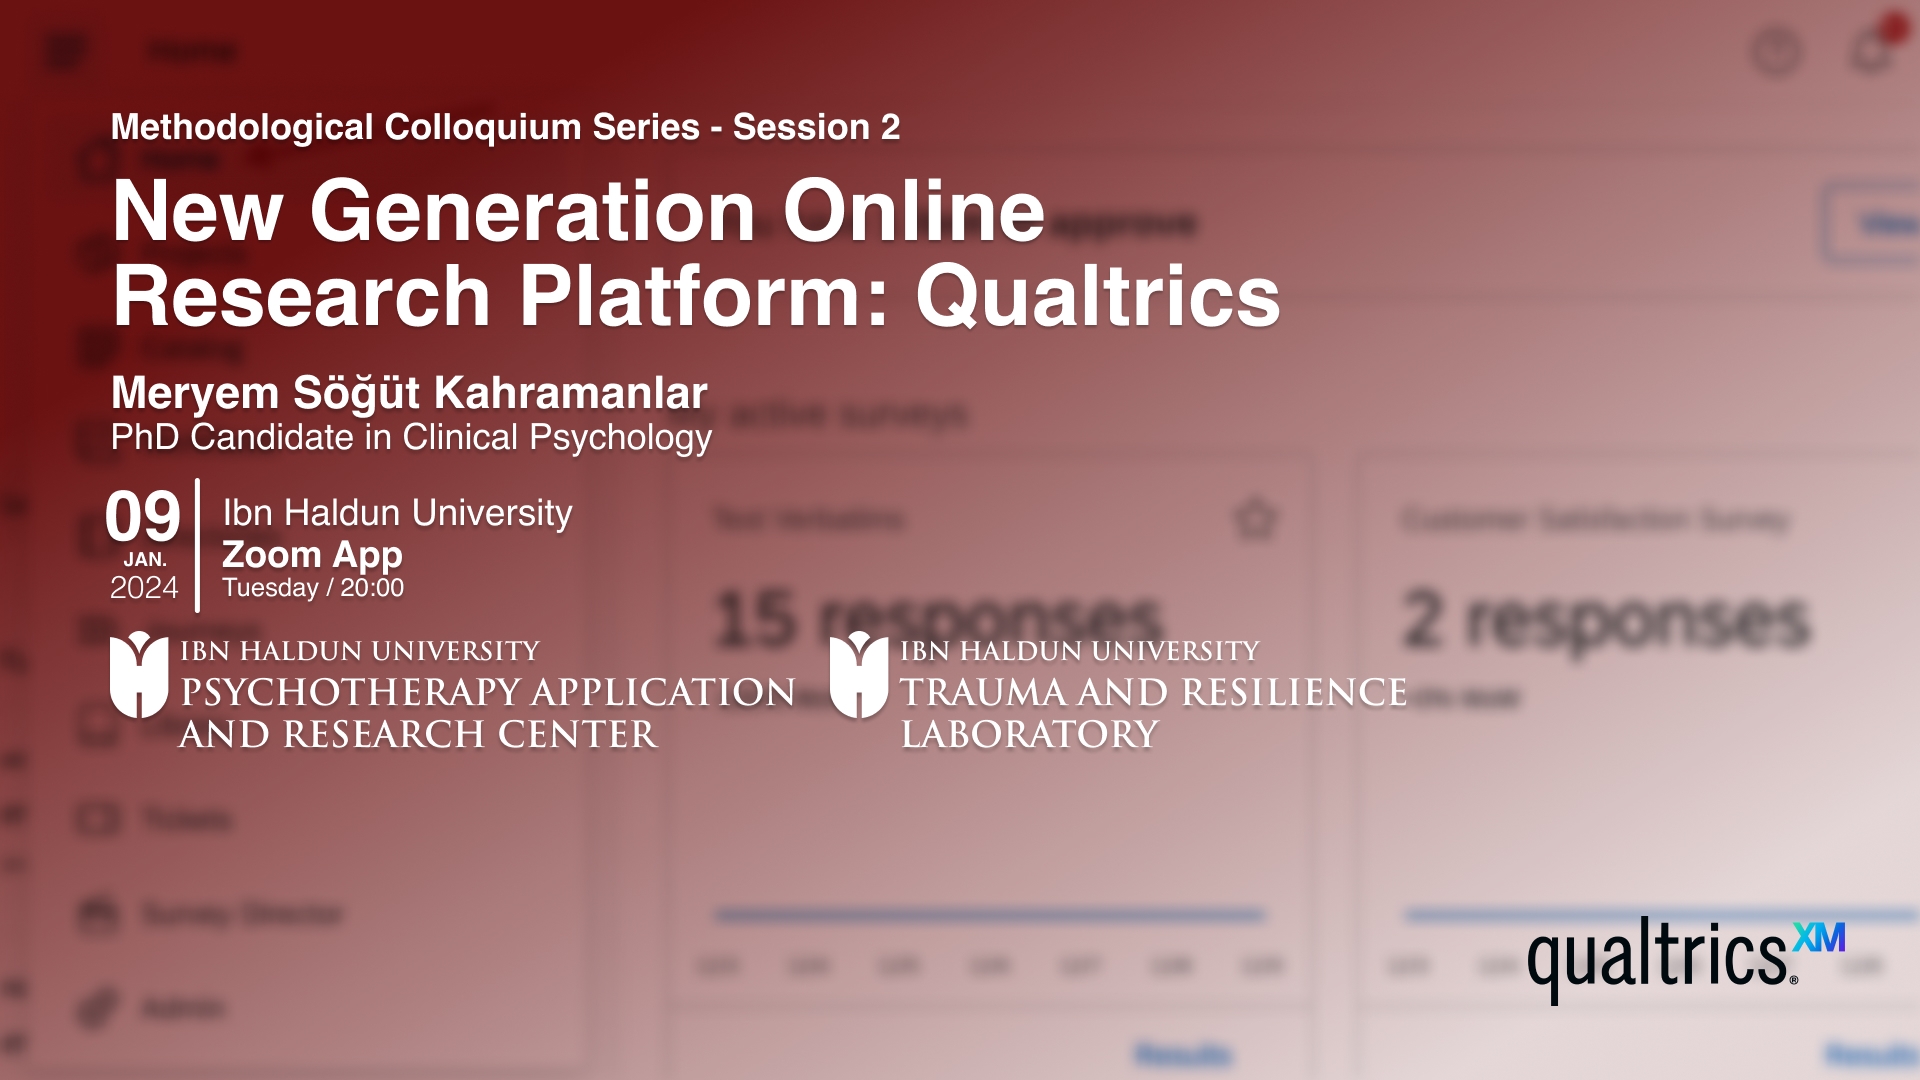 The Online Research Platform for a New Generation: Qualtrics